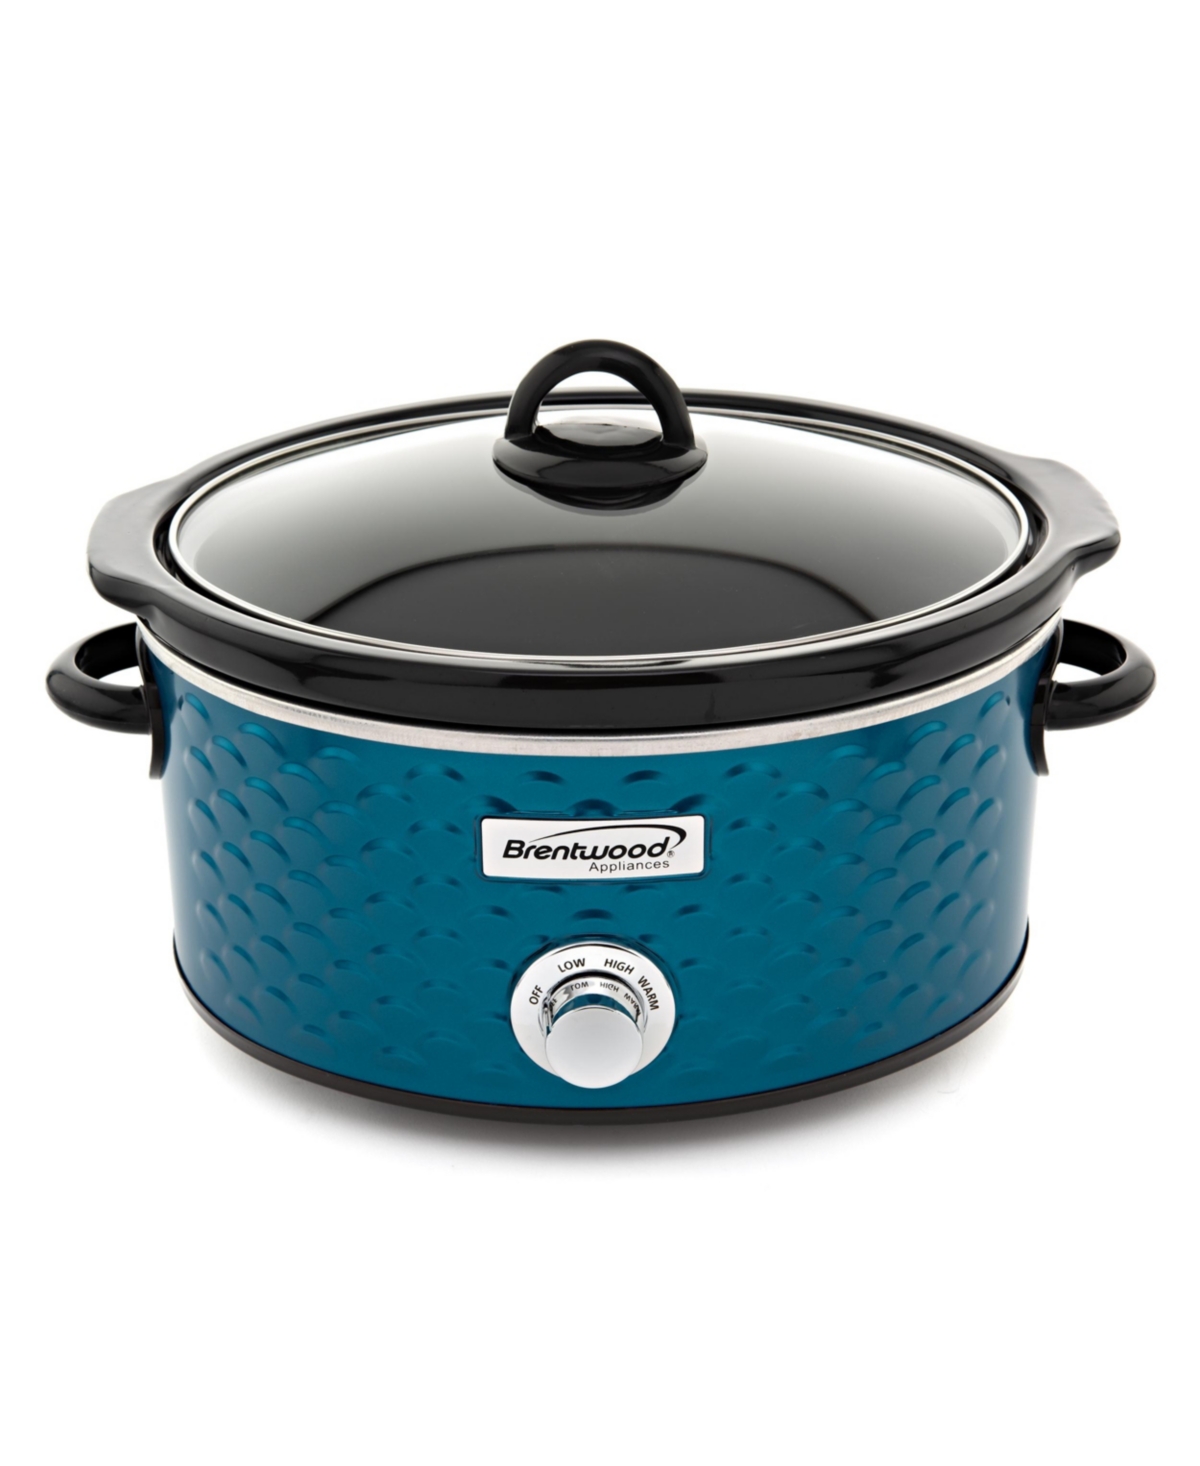 Brentwood Stainless Steel 1.9 Quart Electric Hot Pot Cooker And